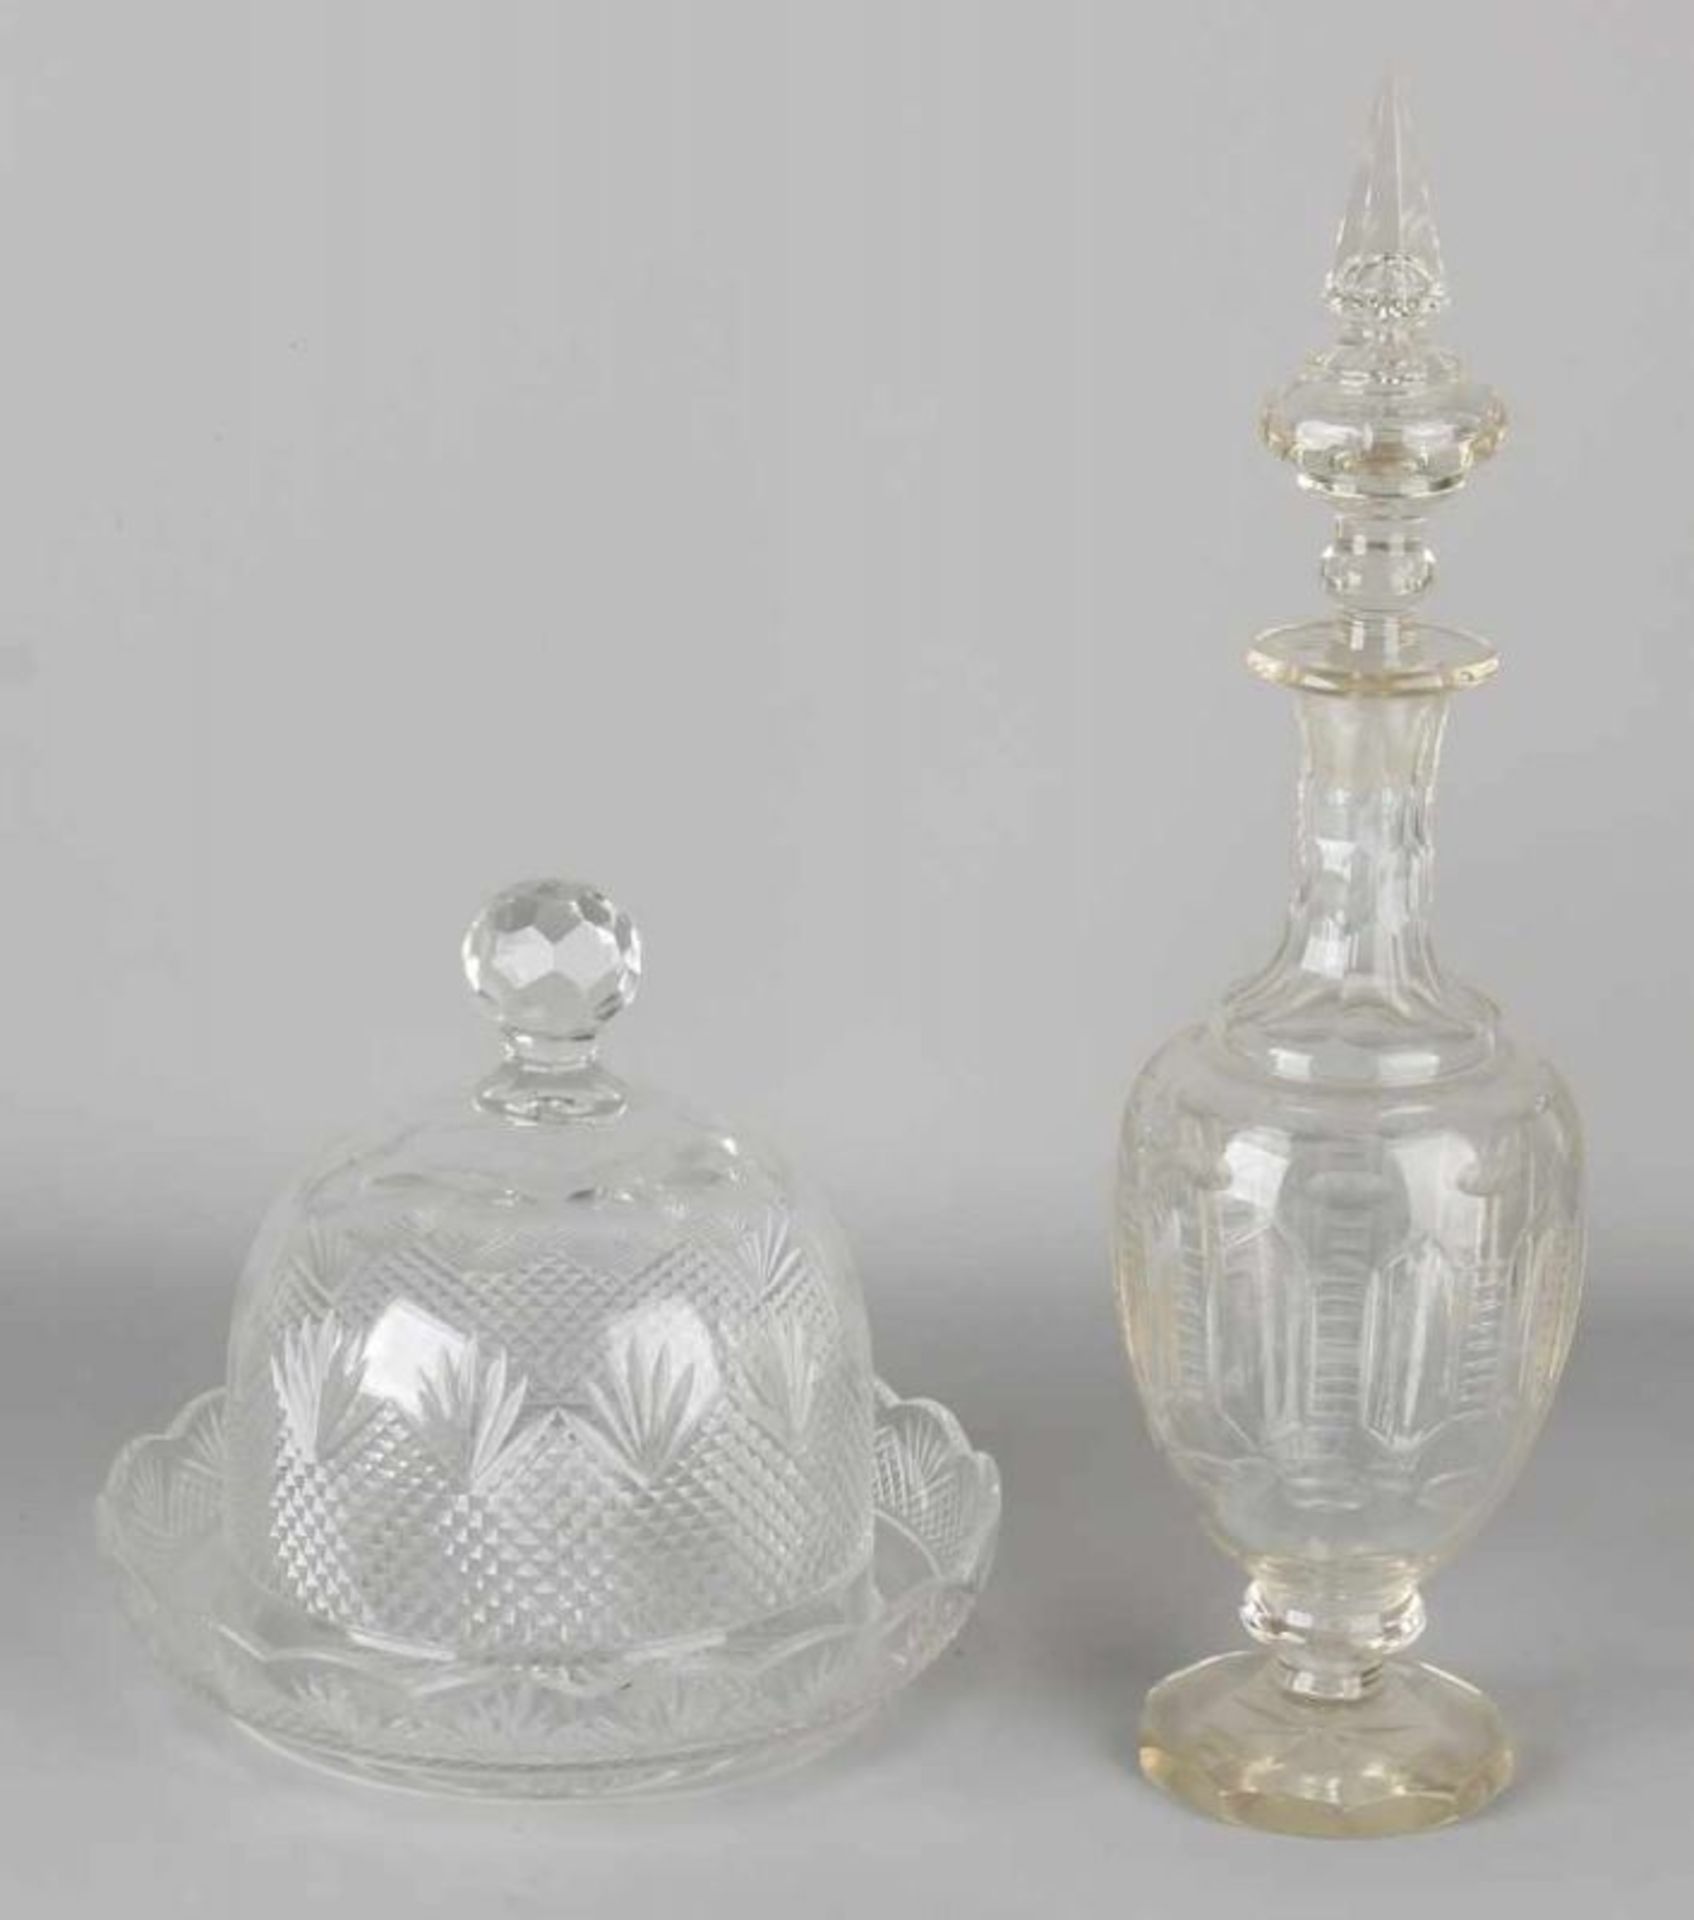 Twice antique crystal. One major cheese dish + ground glass stopper decanter. Size: 20-39 cm. In